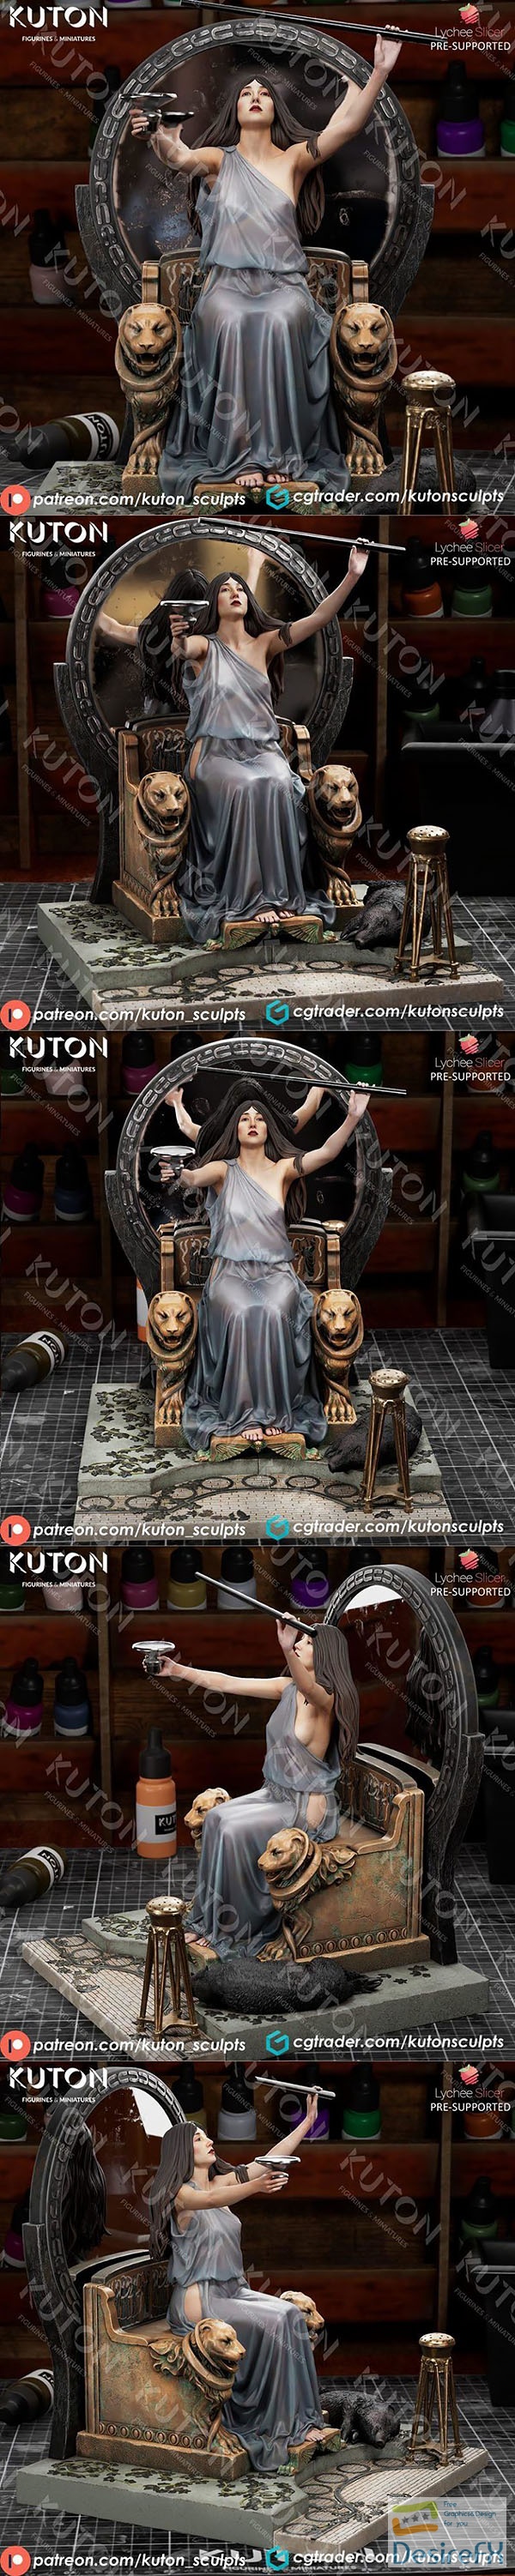 Kuton Figurines – Circe Offering the Cup to Ulysses – 3D Print